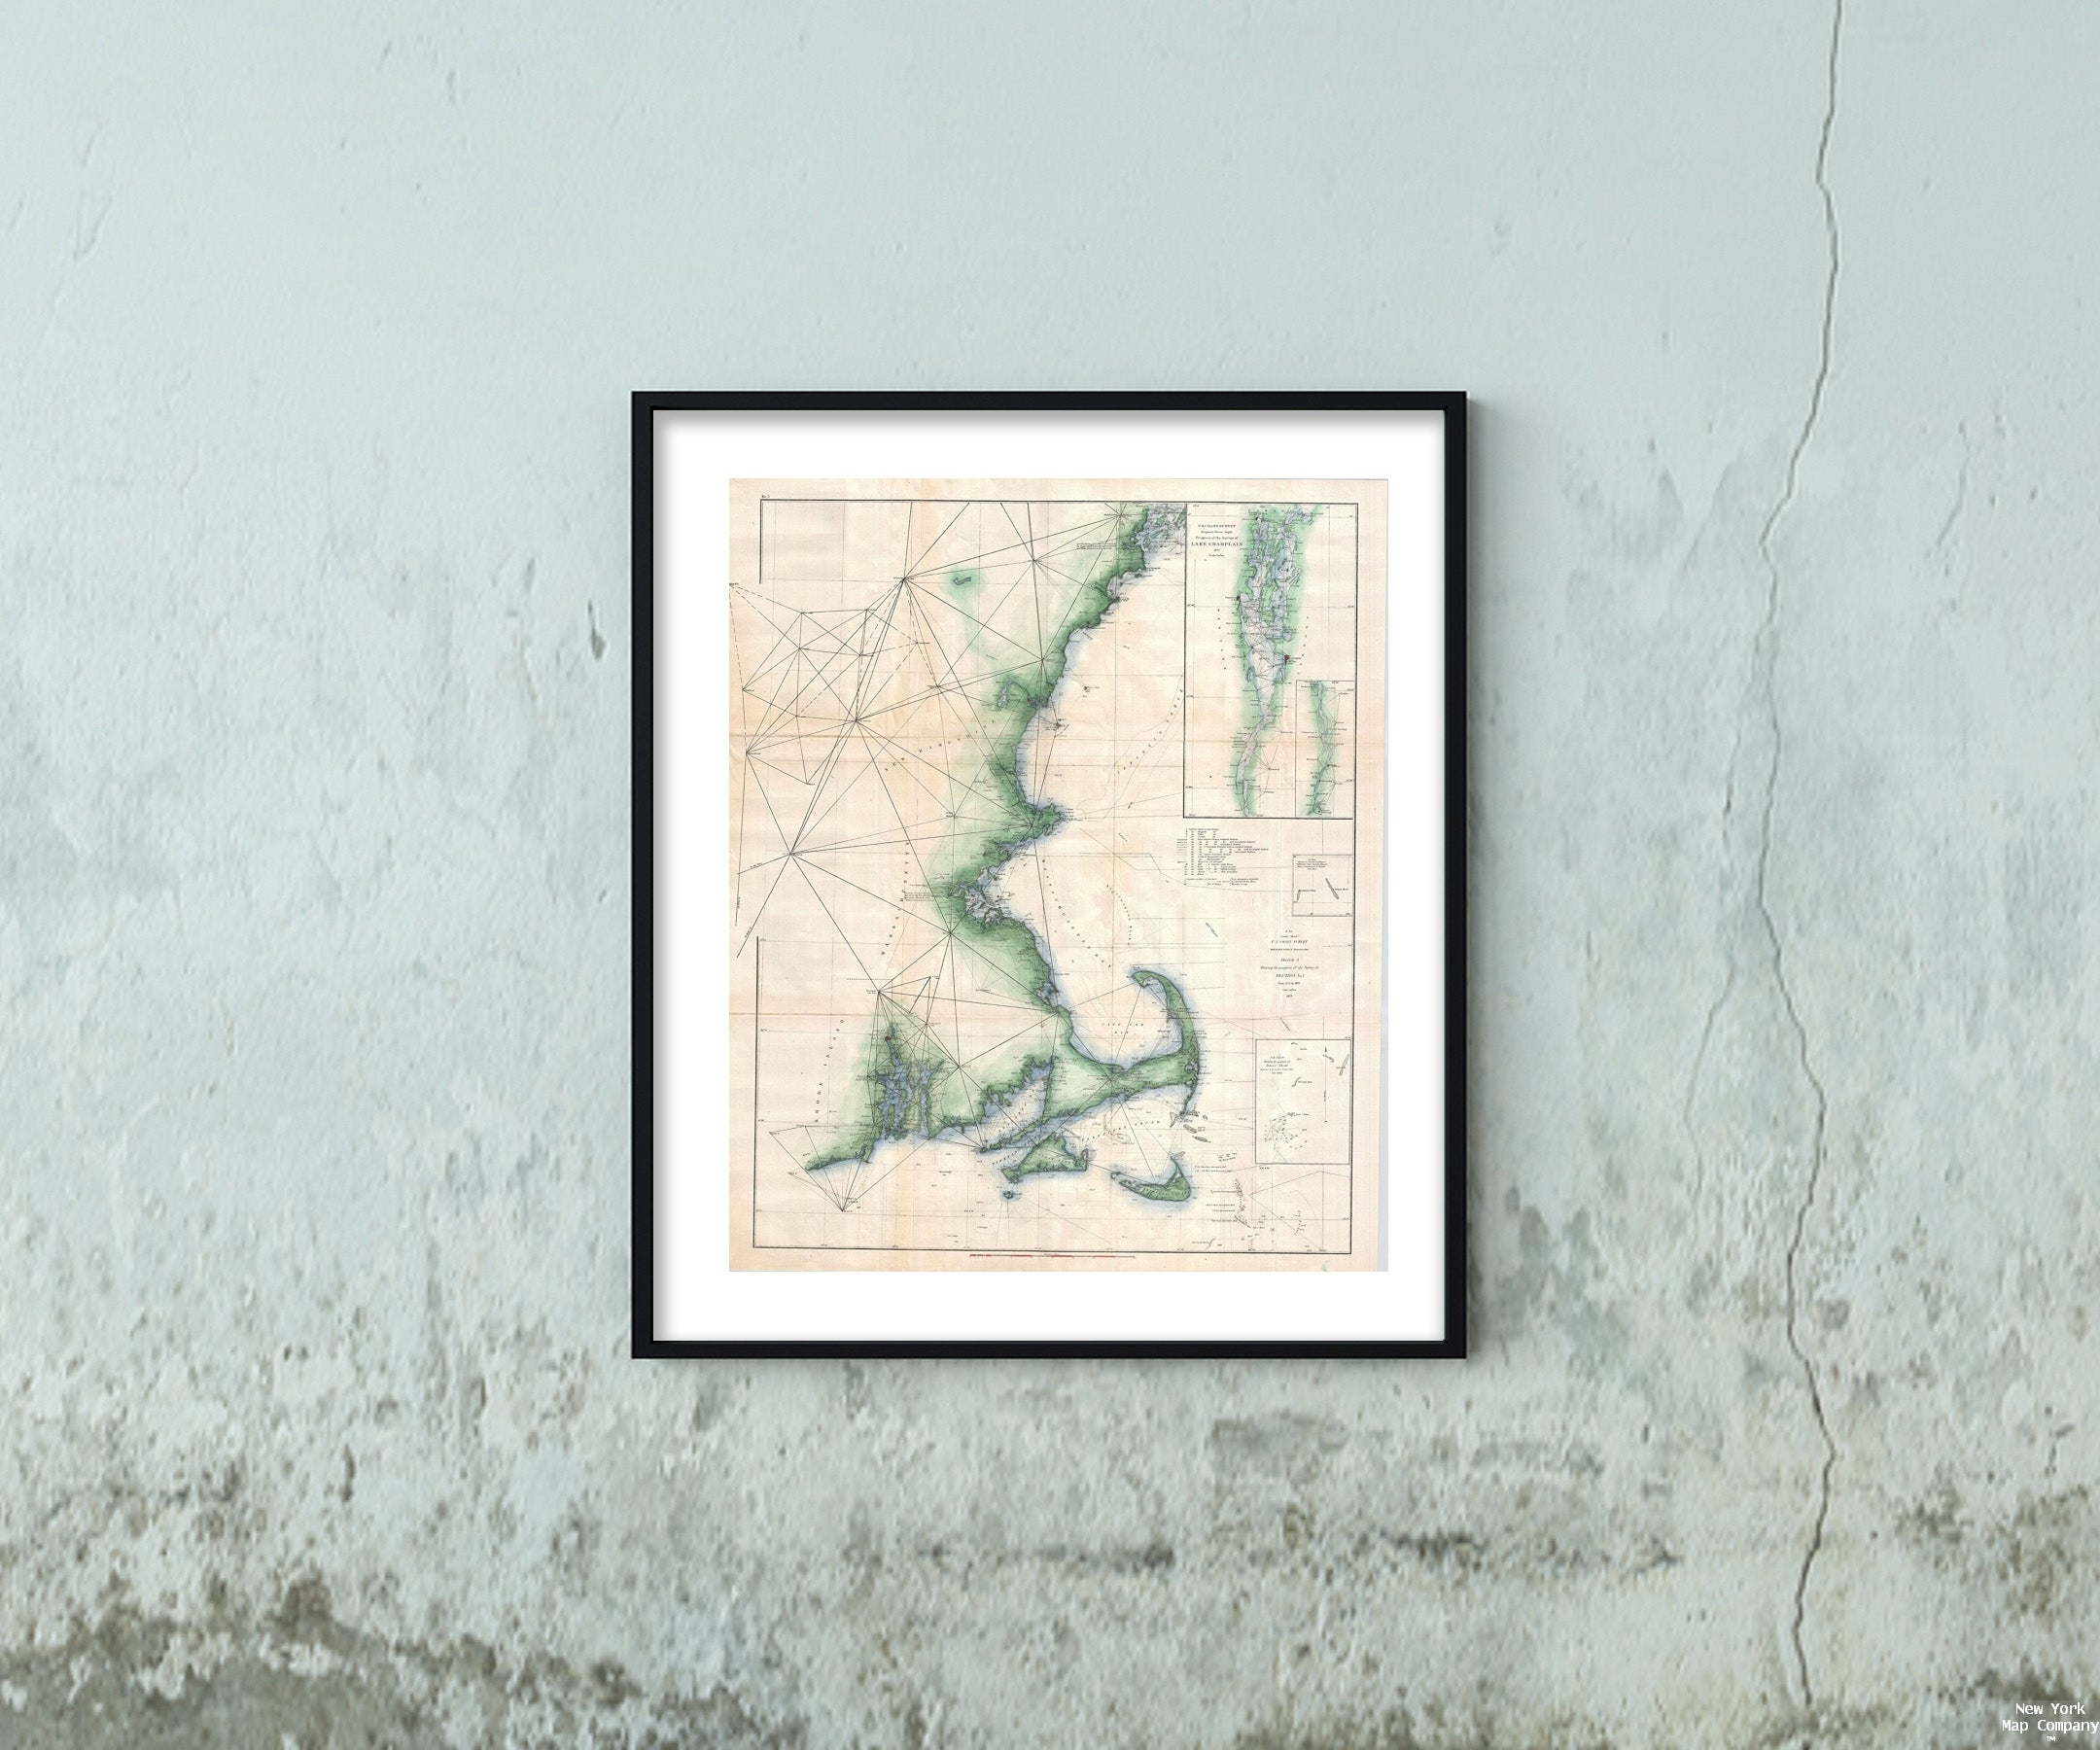 An exceptional example of the 1873 U.S. Coast Survey's progress nautical chart for Massachusetts and Maine. Covers the coast line from Narraganset Bay (Rhode Island) eastwards past Martha's Vineyard and Nantucket then north to Cape Cod, Boston Harbor, Ca